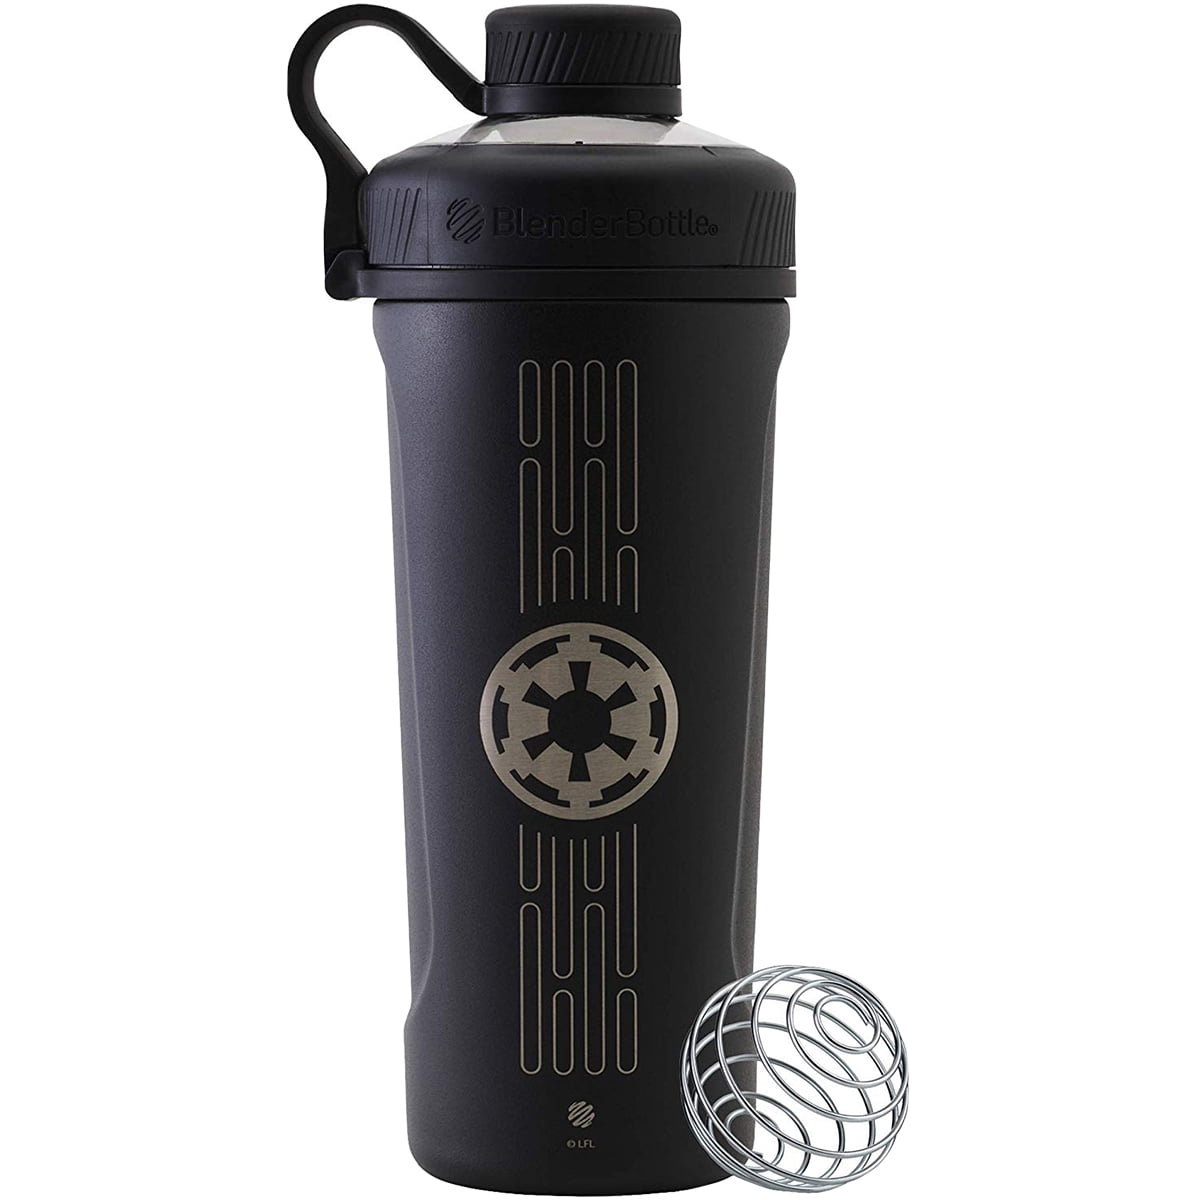 BLENDER BOTTLE STAR Wars Radian 26 oz. Insulated Stainless Steel Shaker Cup  $32.99 - PicClick